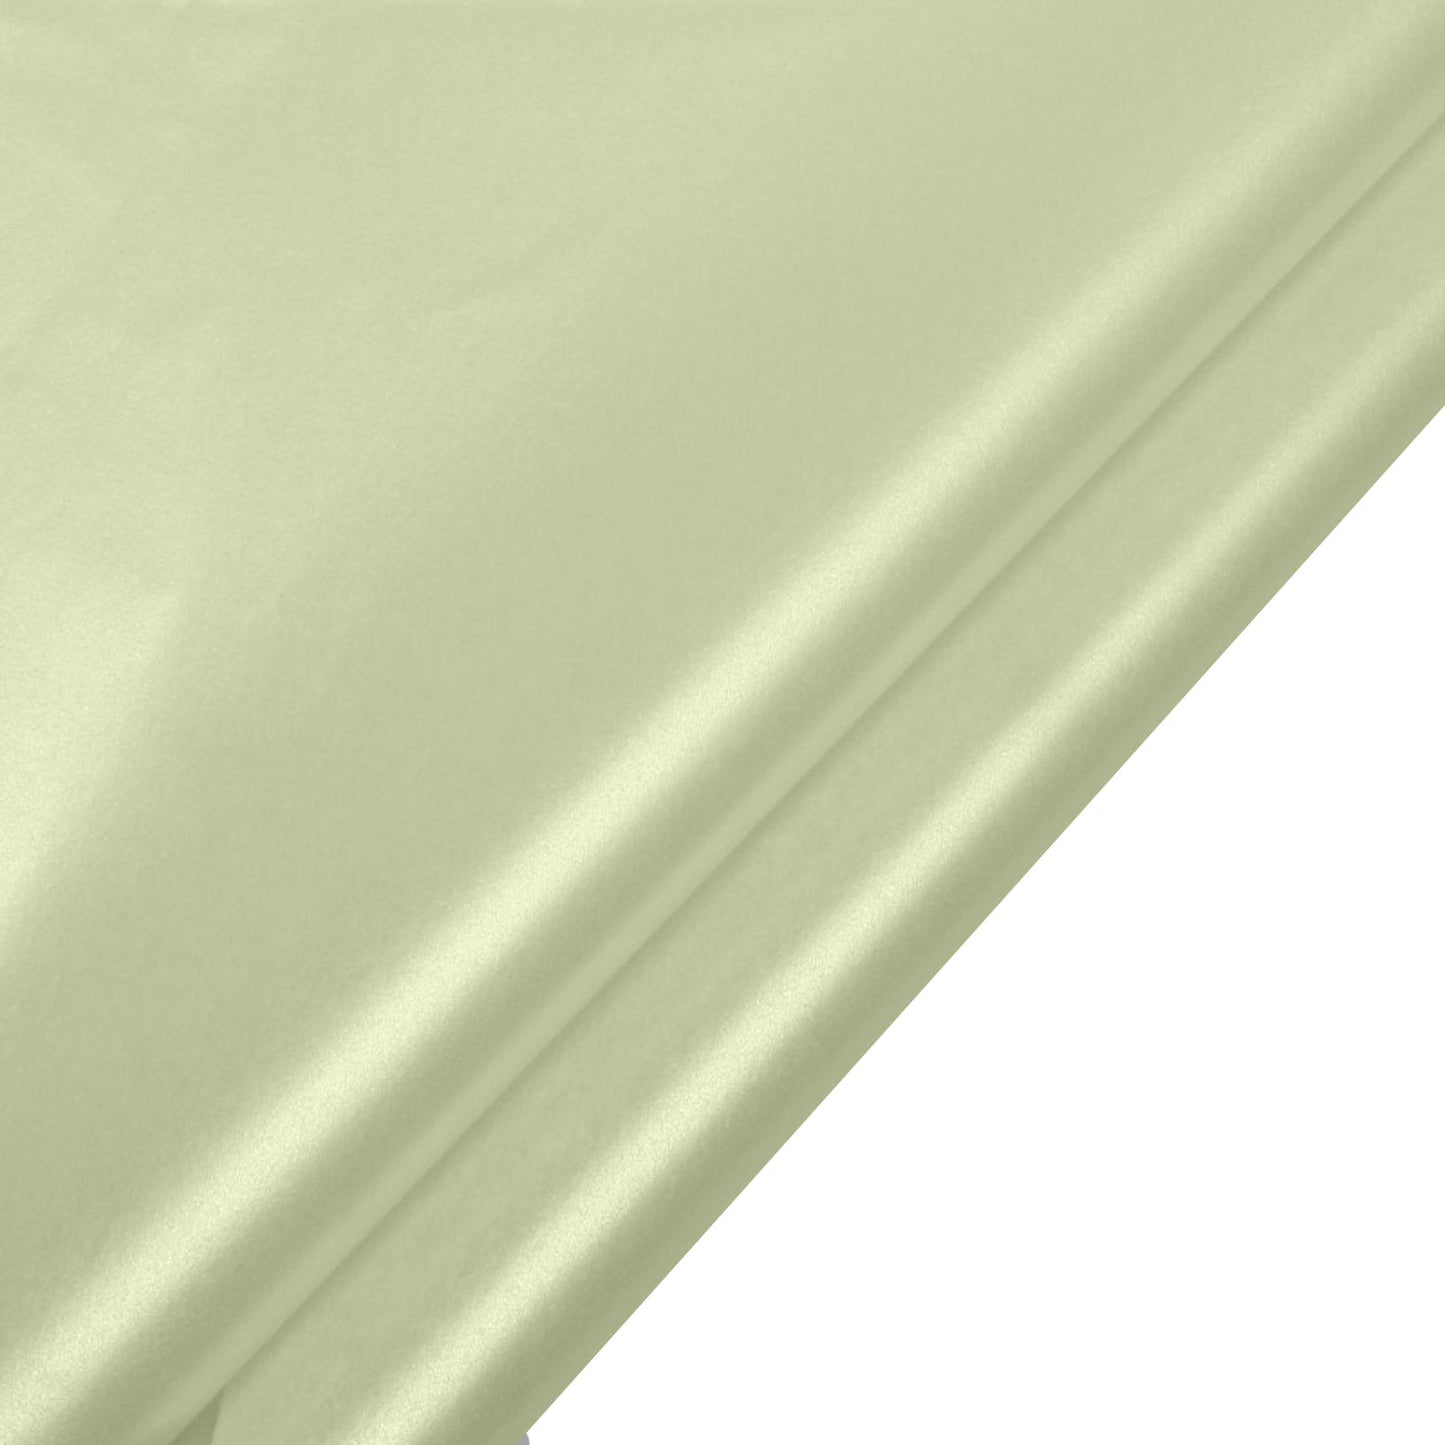 100sheets Light Lime 19.7x27.6 inches Pearlized Tissue Paper; $0.40/pc